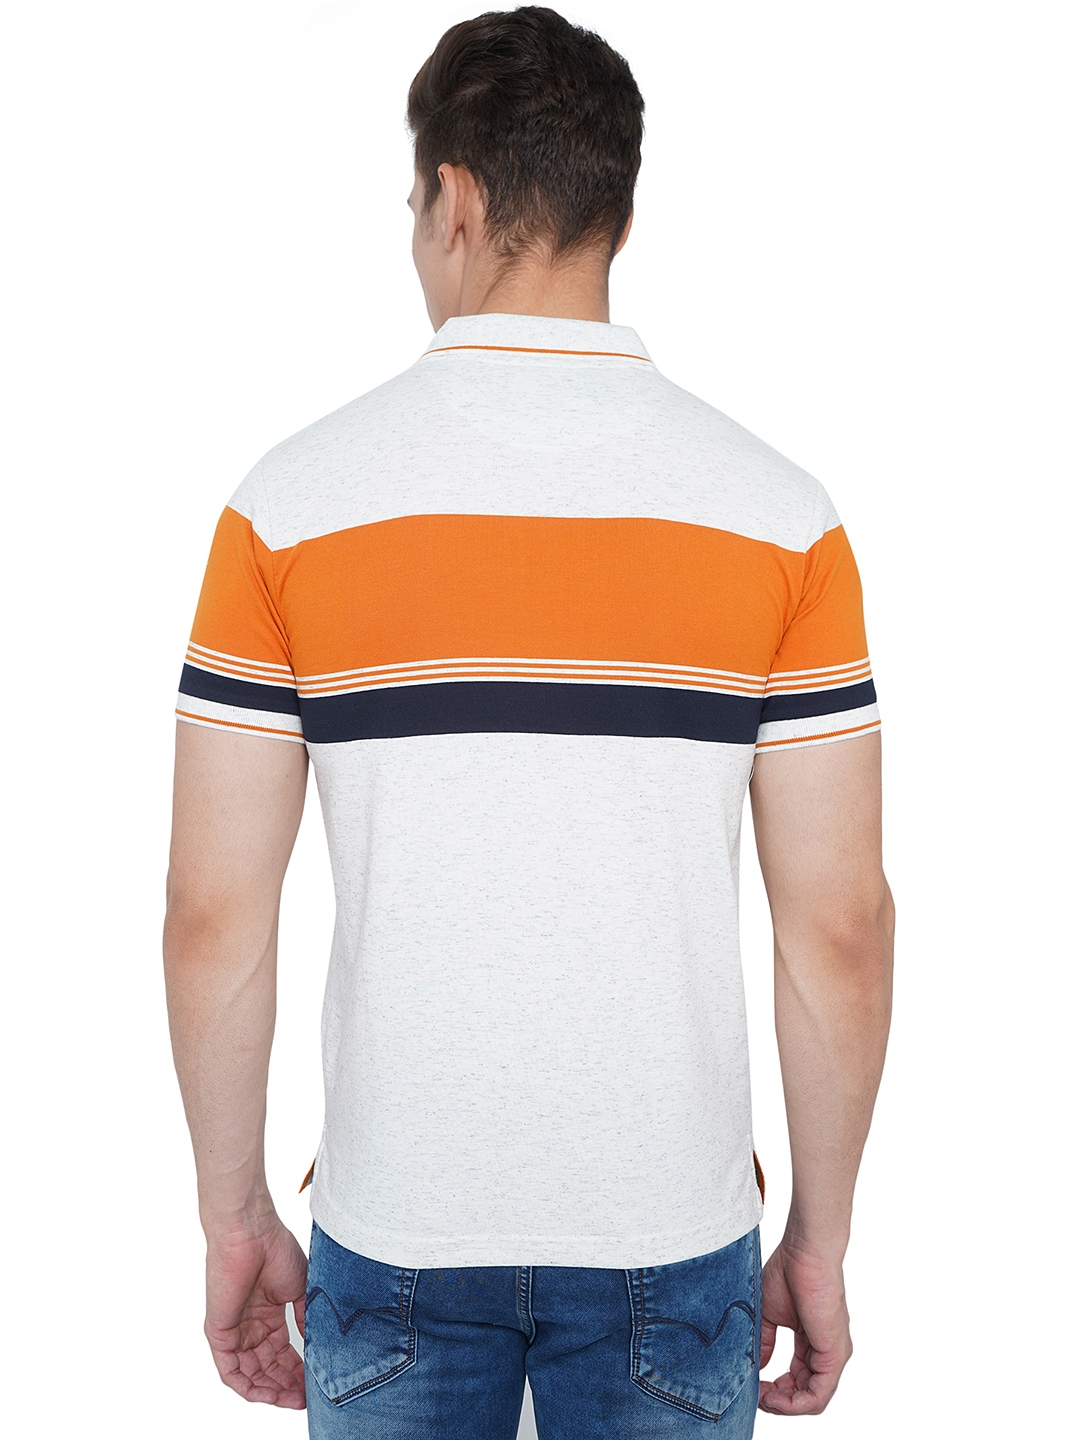 Greenfibre | White Striped Slim Fit Polo T-Shirt | Greenfibre 2